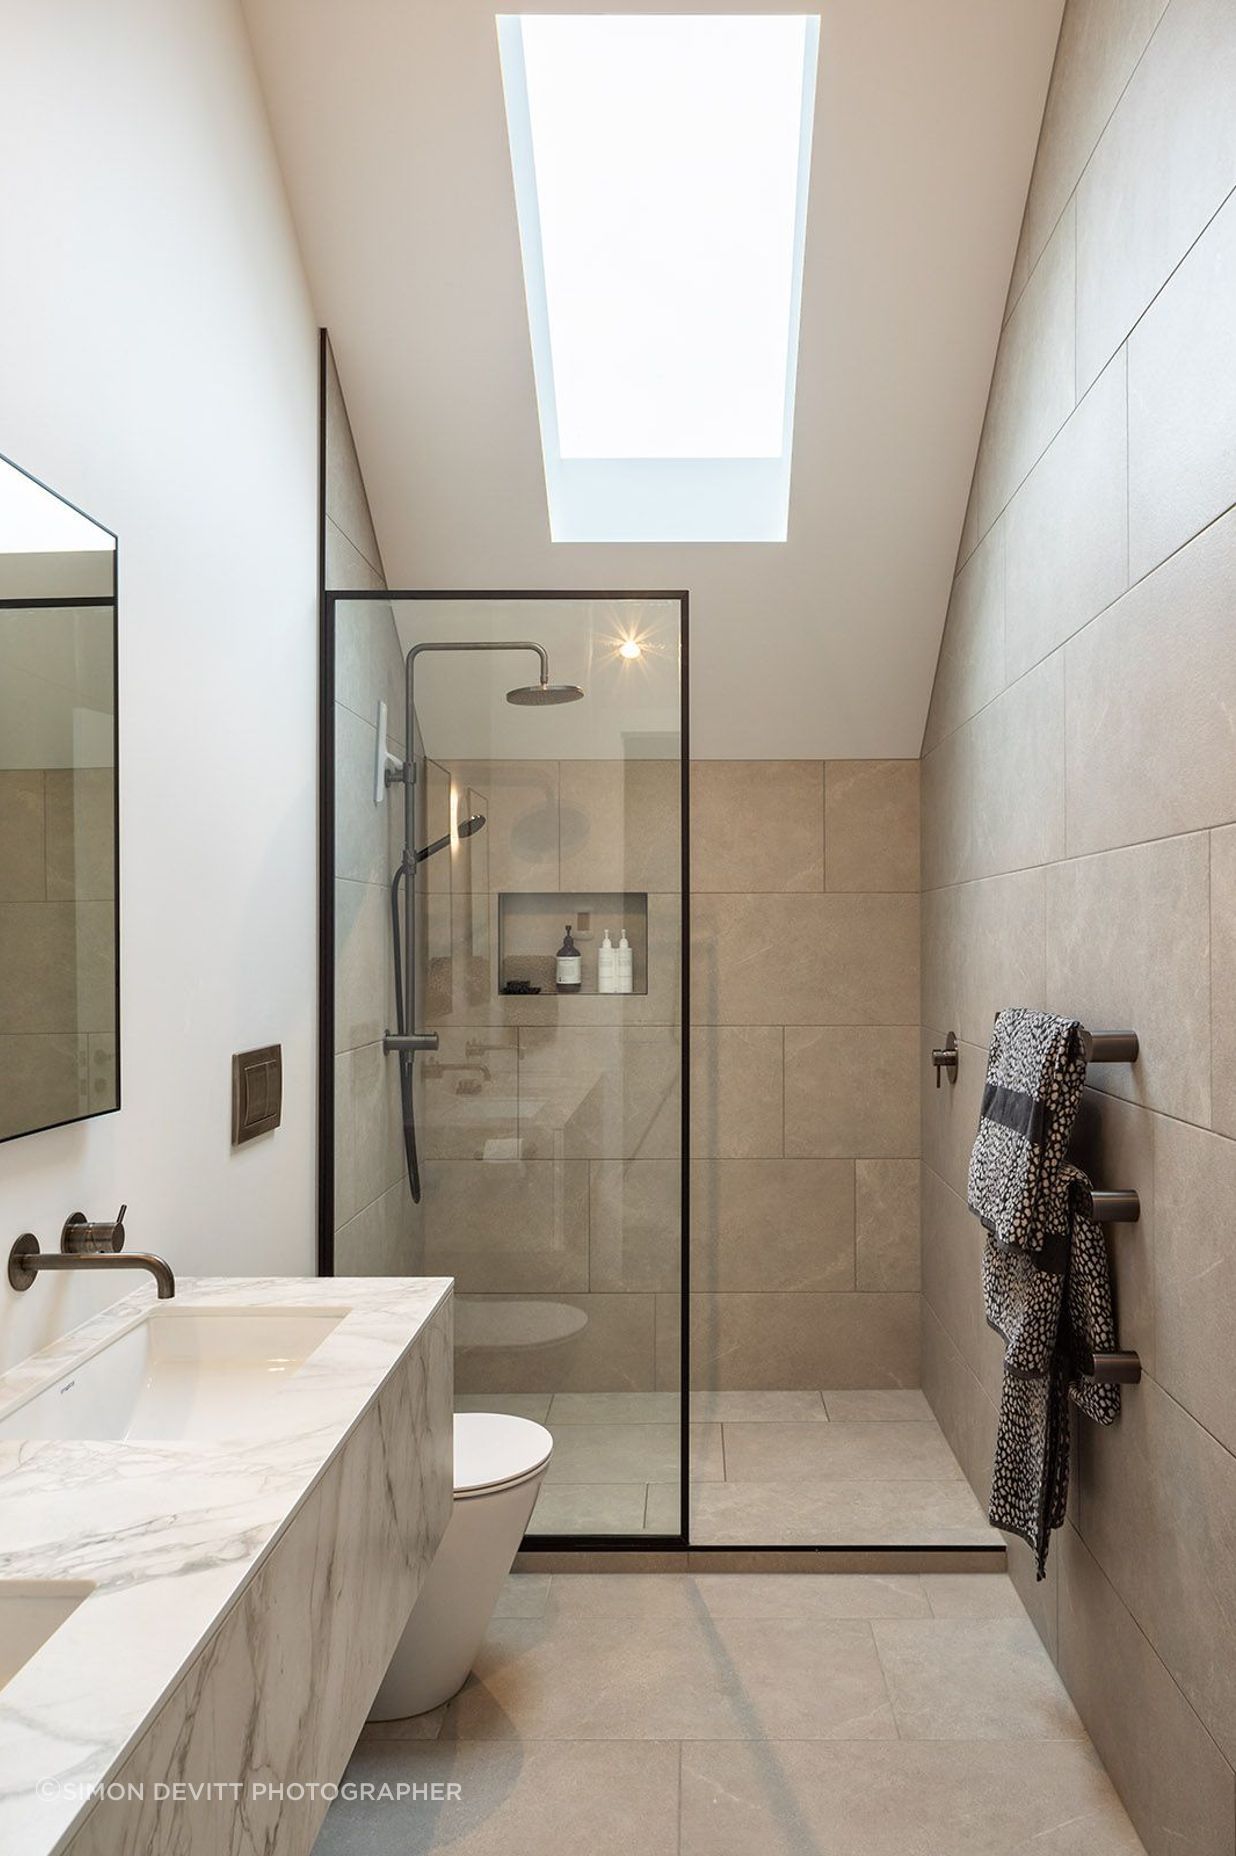 A skylight is cut into the master en suite, cleverly negating the need for a window and illuminating the natural stone palette.